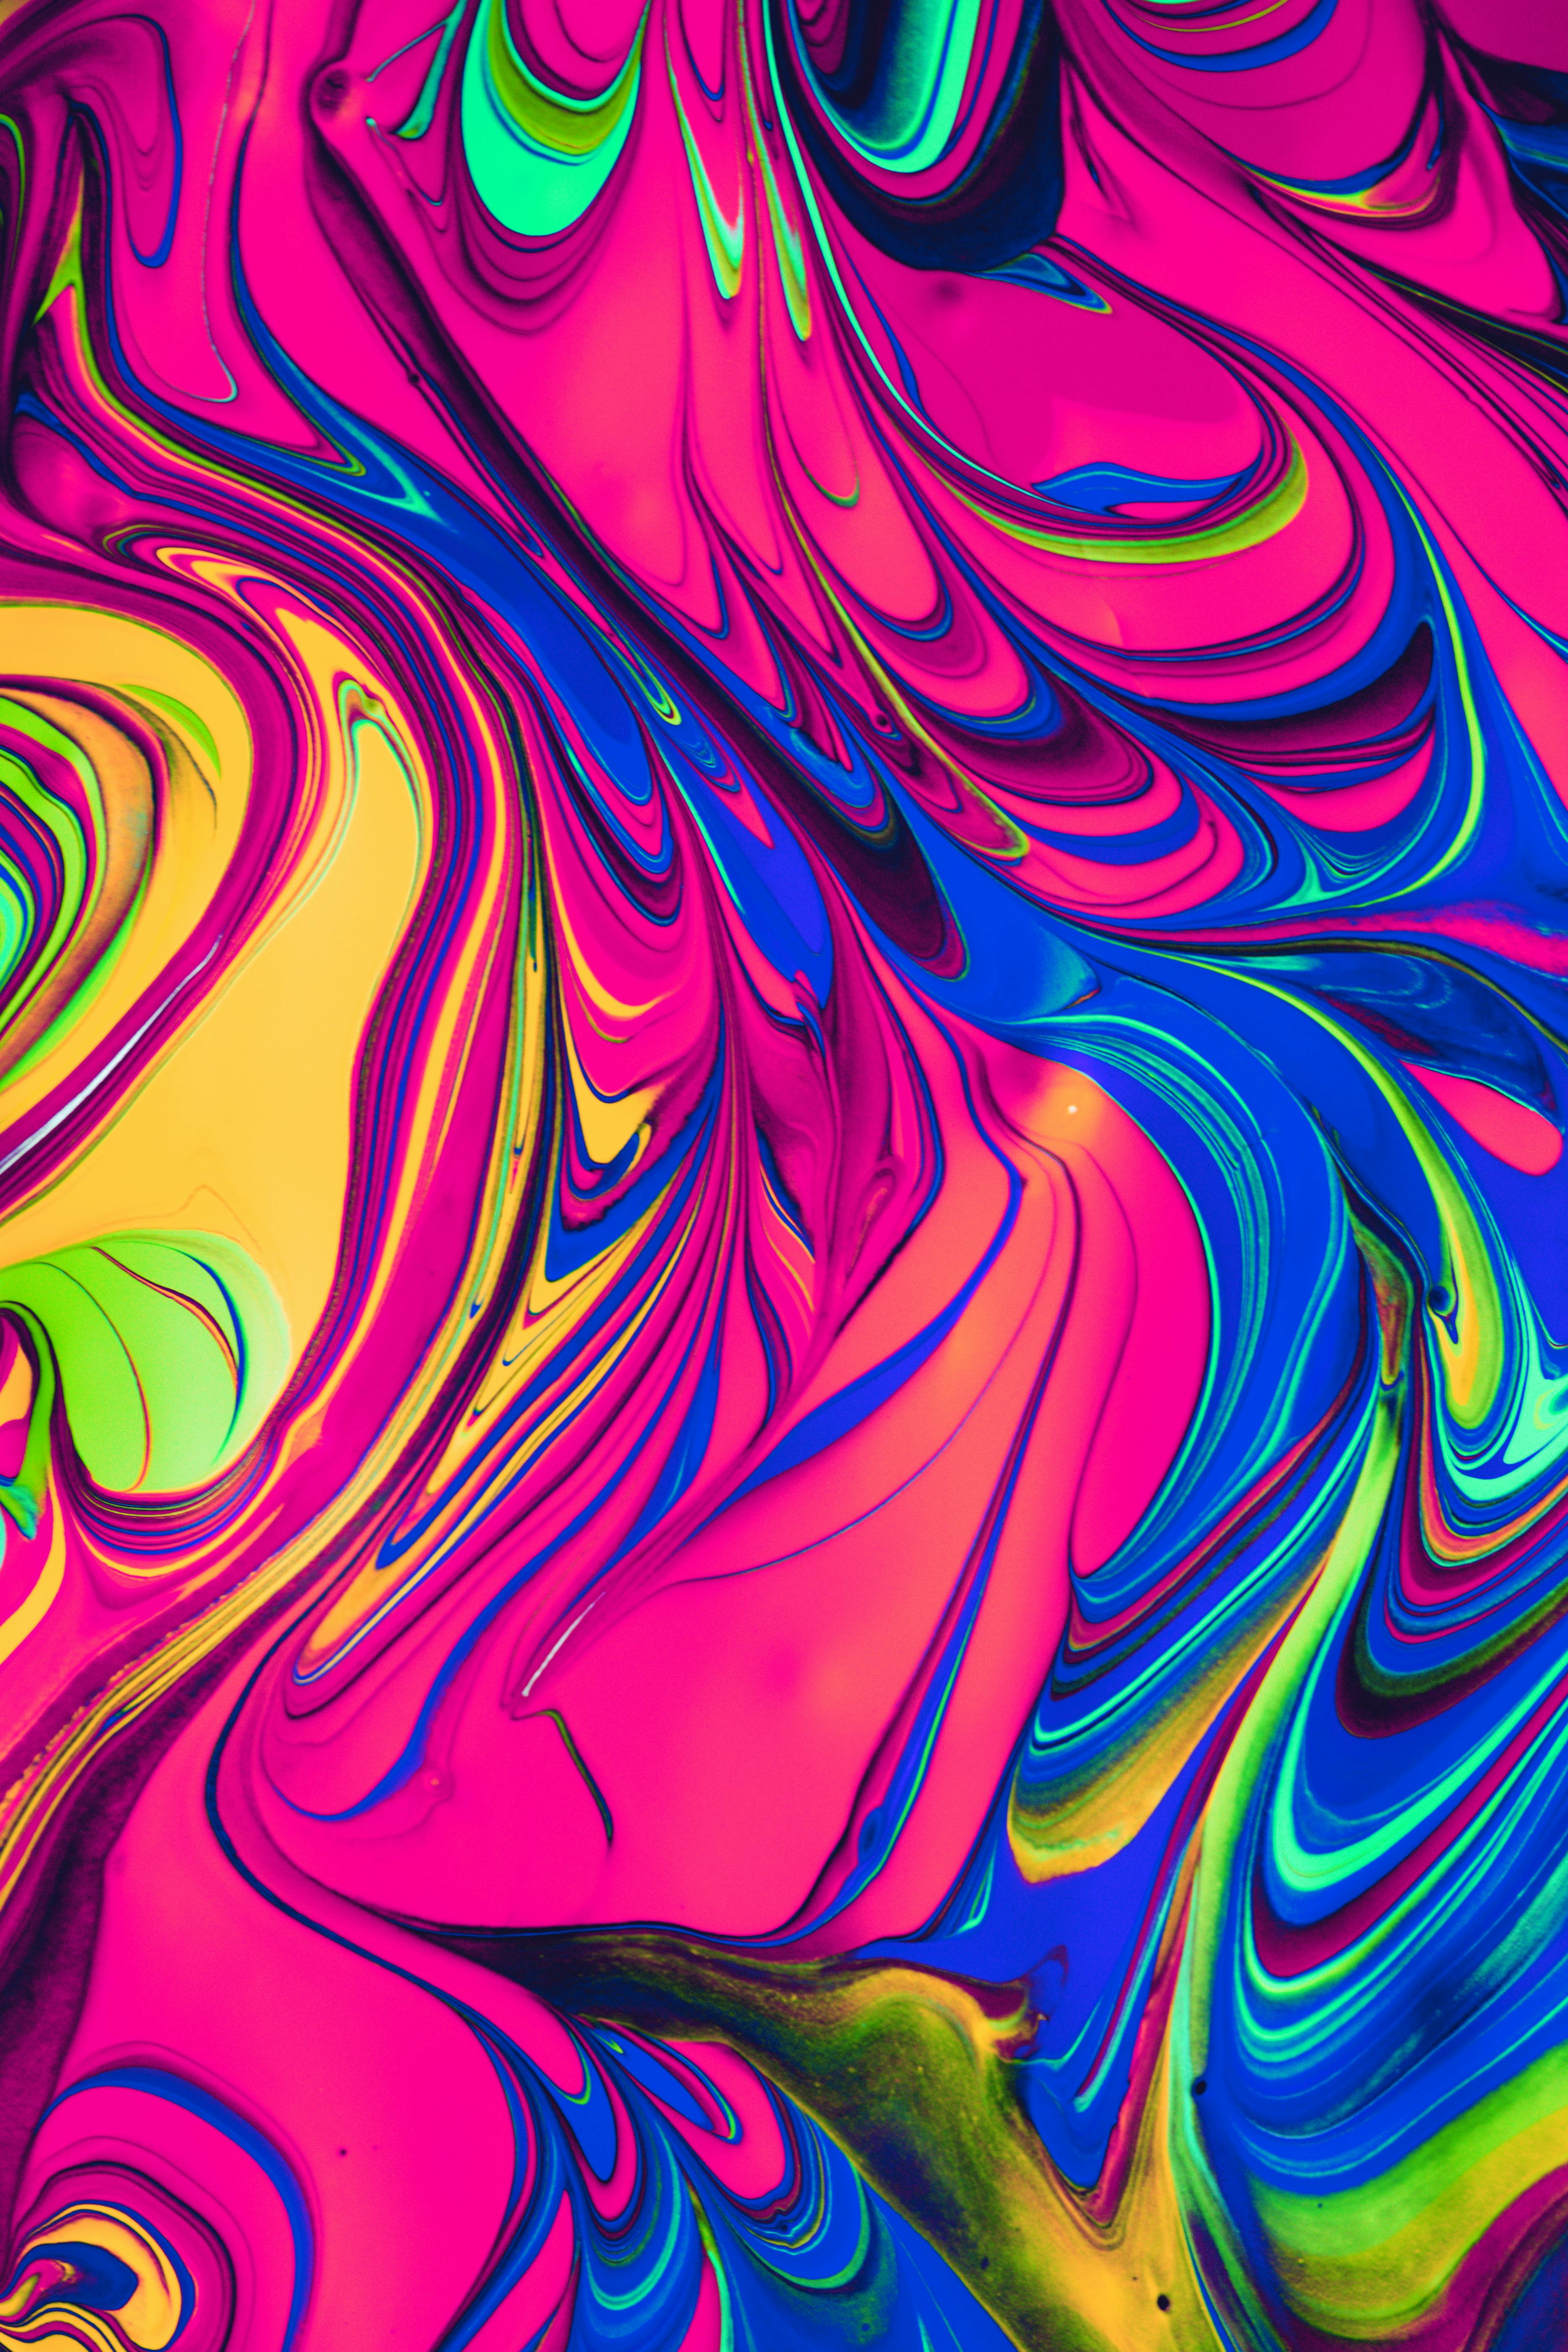 Digital art abstract colorful liquid modern covers psychedelic  background aesthetic 4K wallpaper download